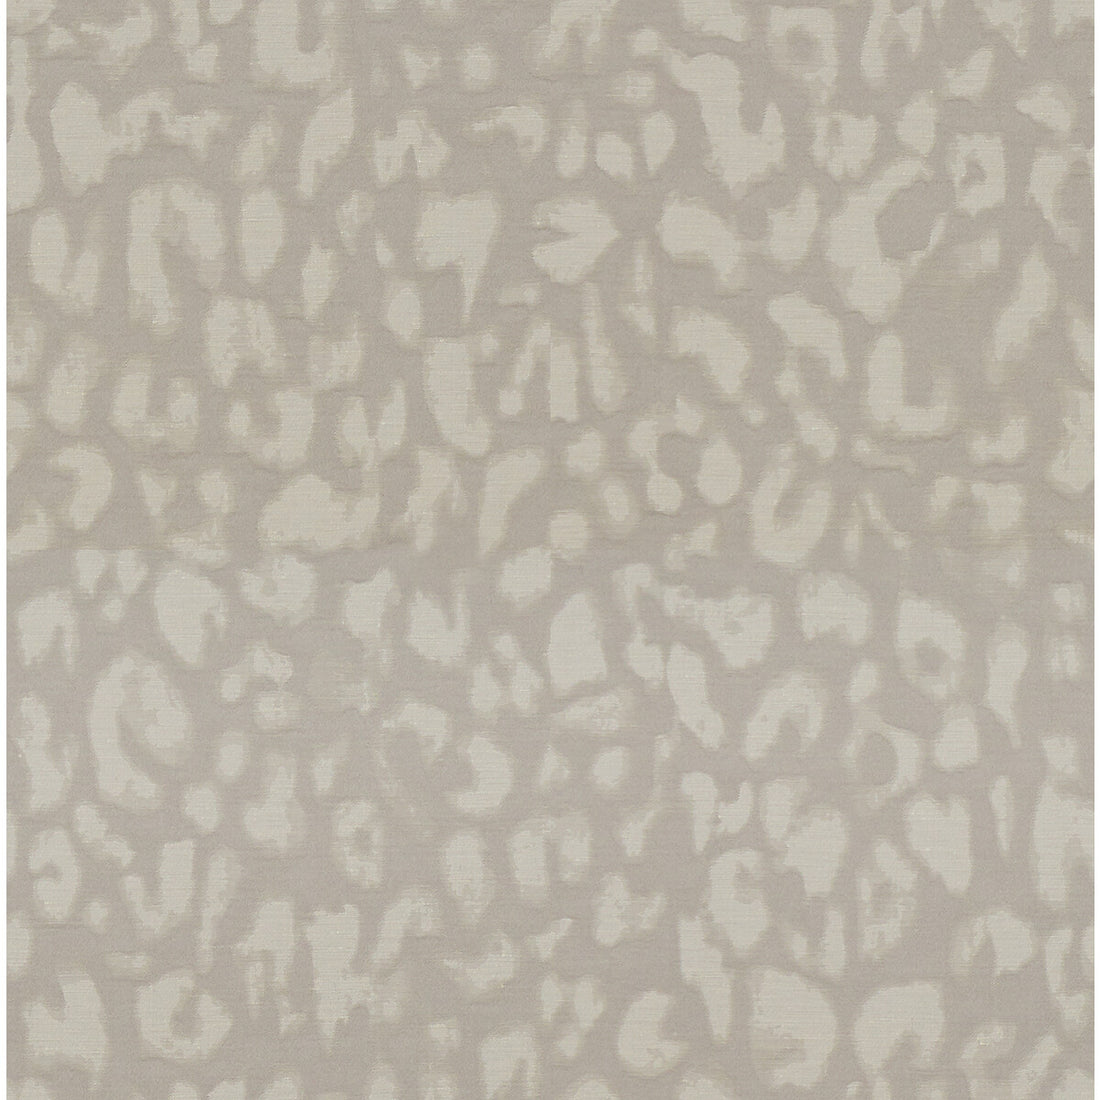 Bhiki Due fabric in alloy color - pattern 34579.11.0 - by Kravet Couture in the Calvin Klein Home collection